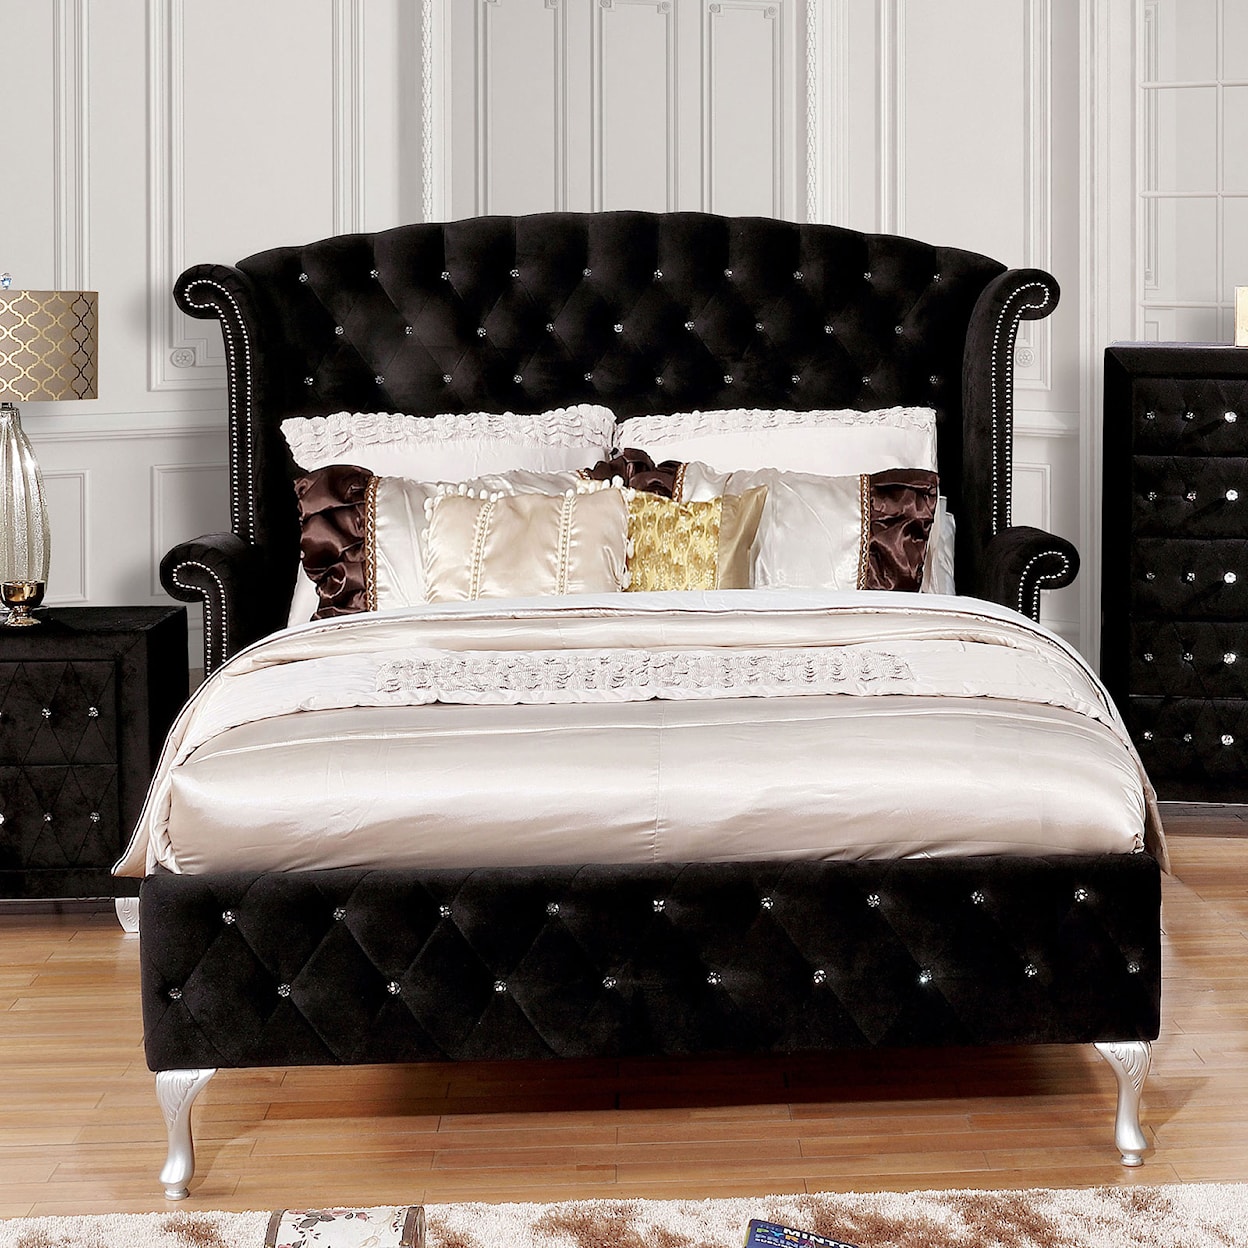 Furniture of America - FOA Alzire Queen Upholstered Panel Bed